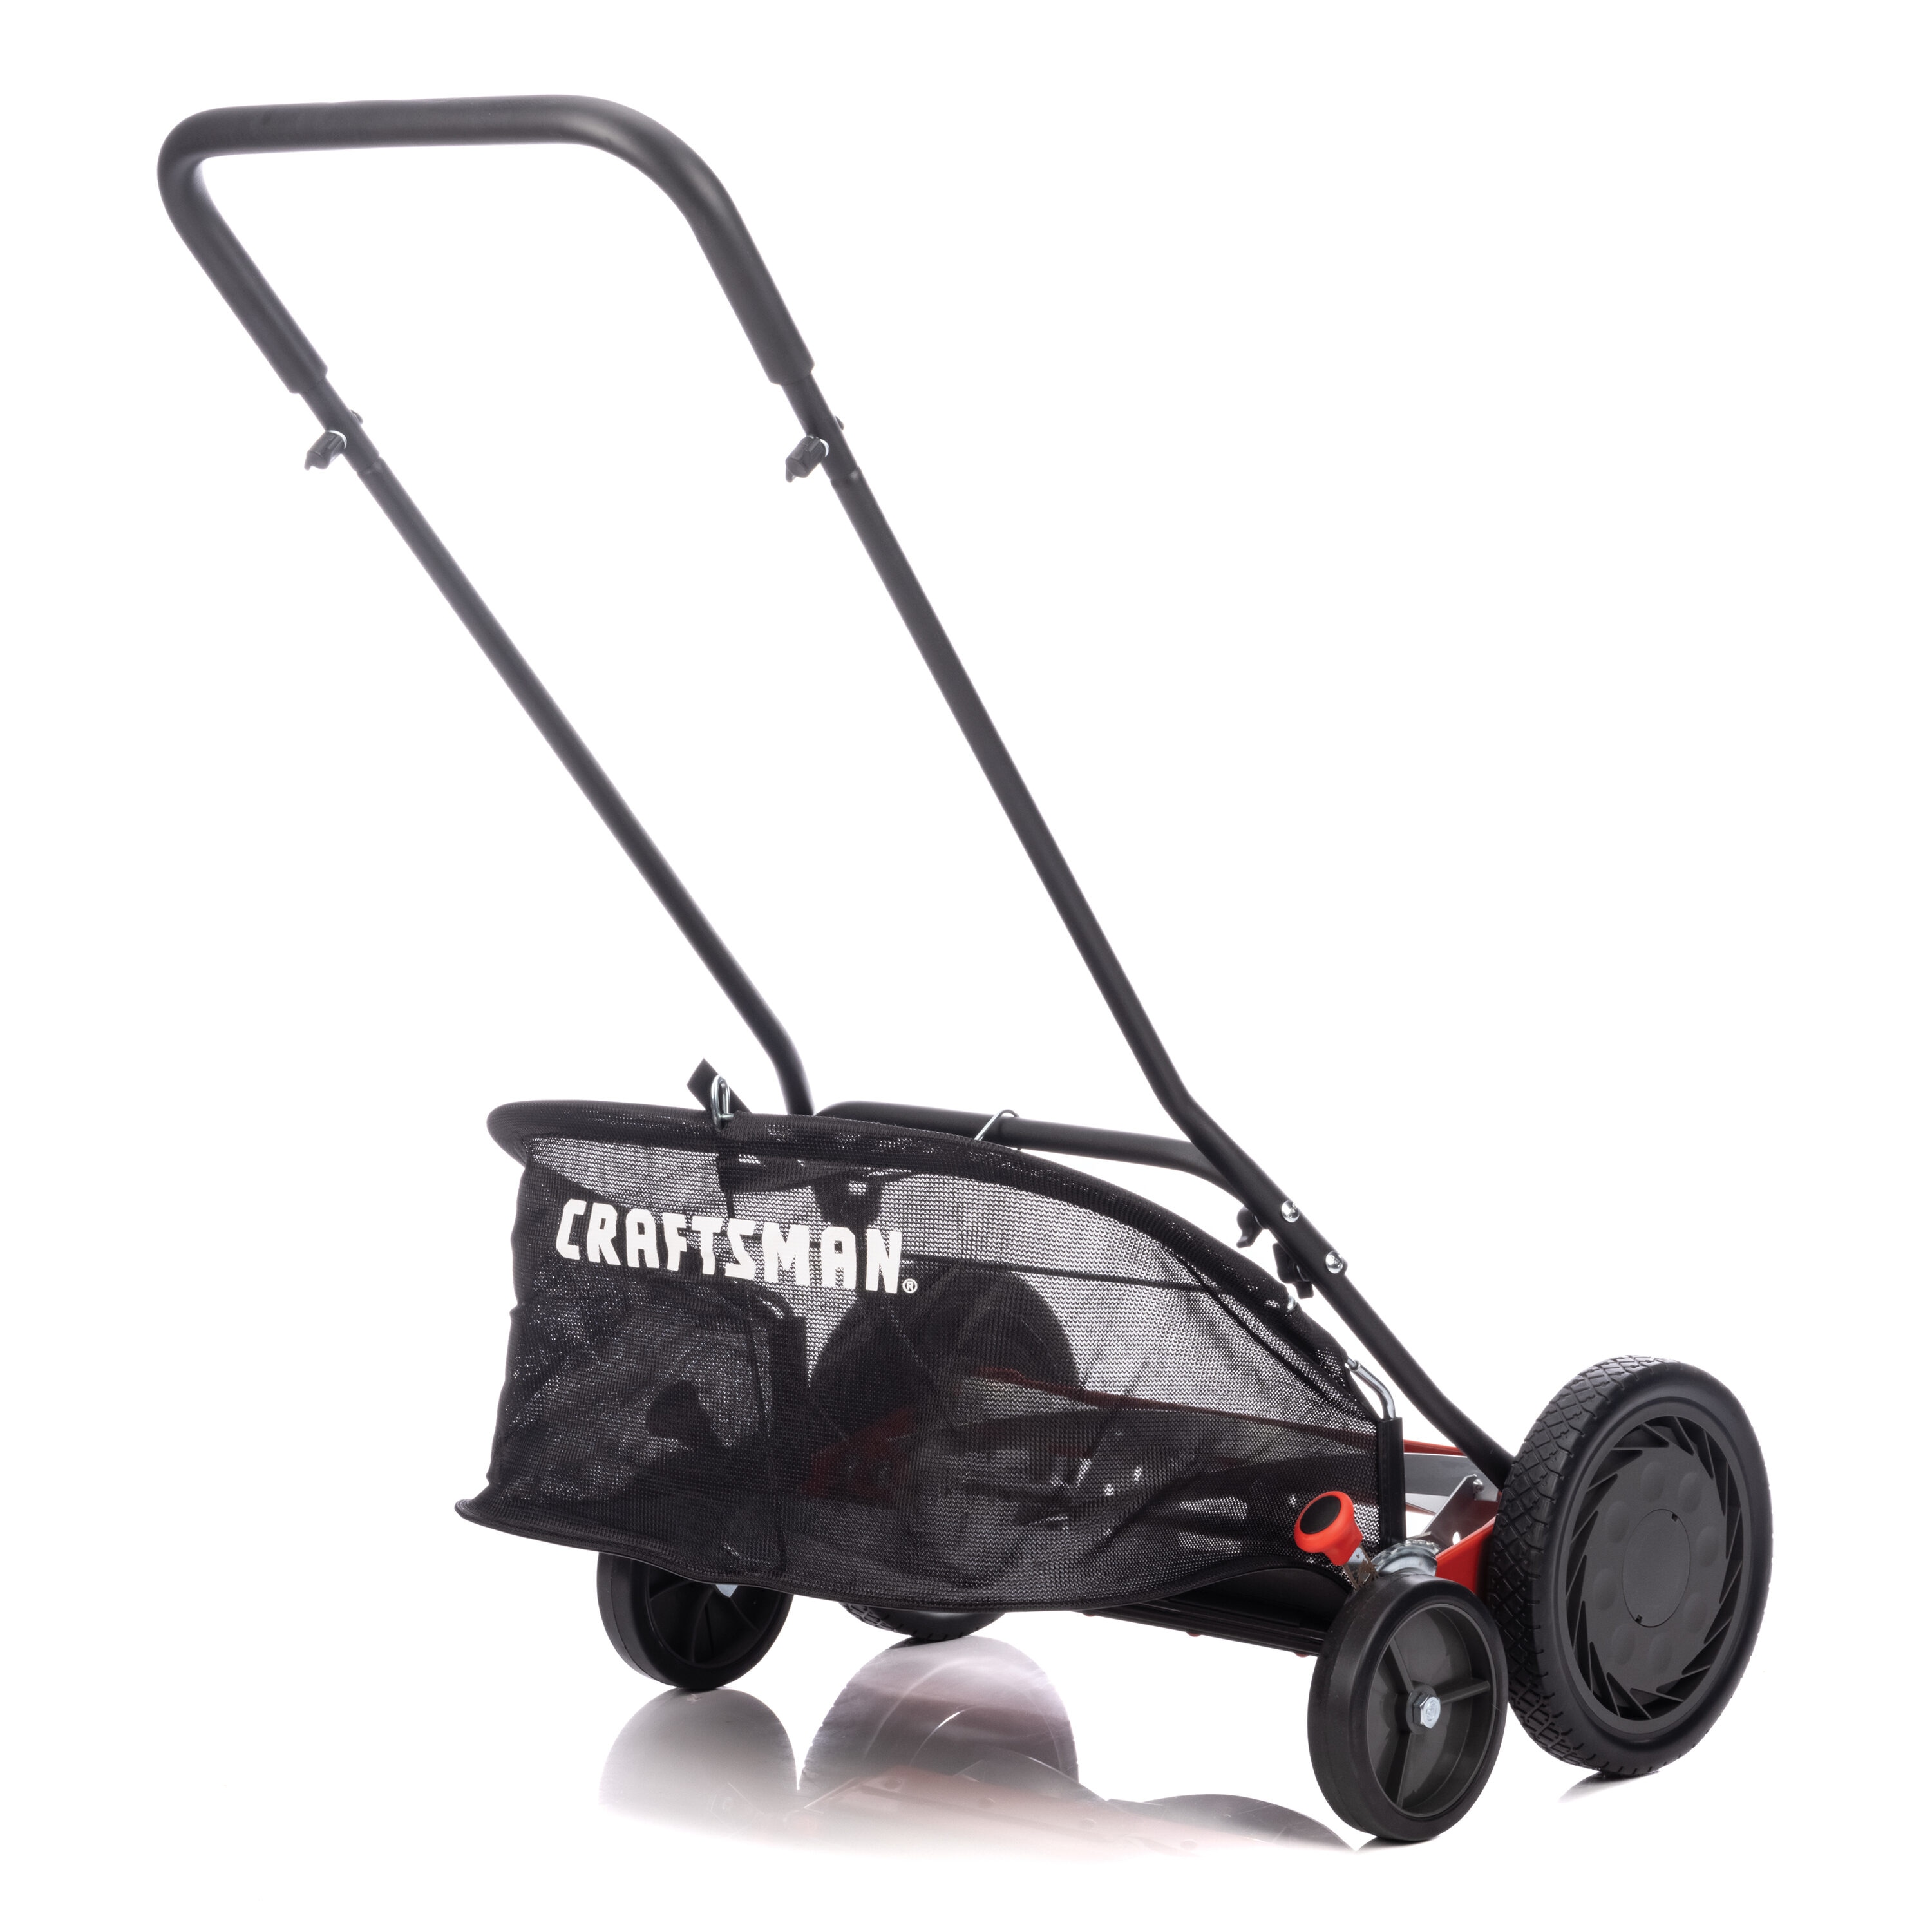 CRAFTSMAN 18-Inch 5-Blade Reel Lawn Mower with Bagger